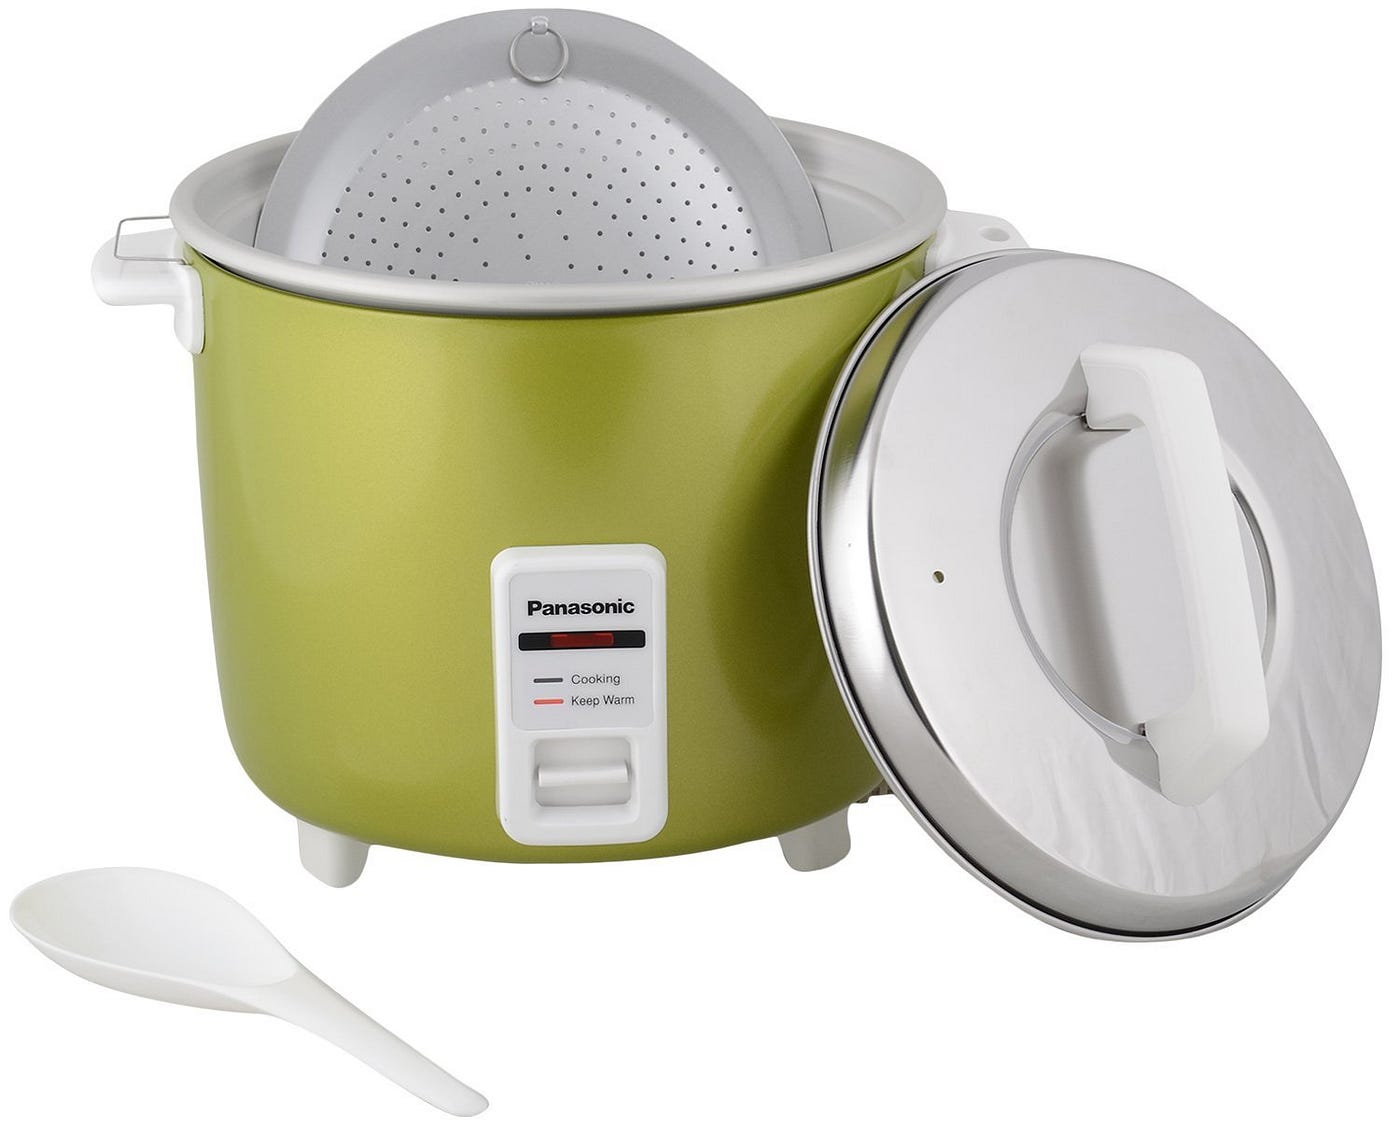 Regal Electric Rice Cooker, 3 Liters Ceramic Inner Bowl Cooks Up to 600 Gms